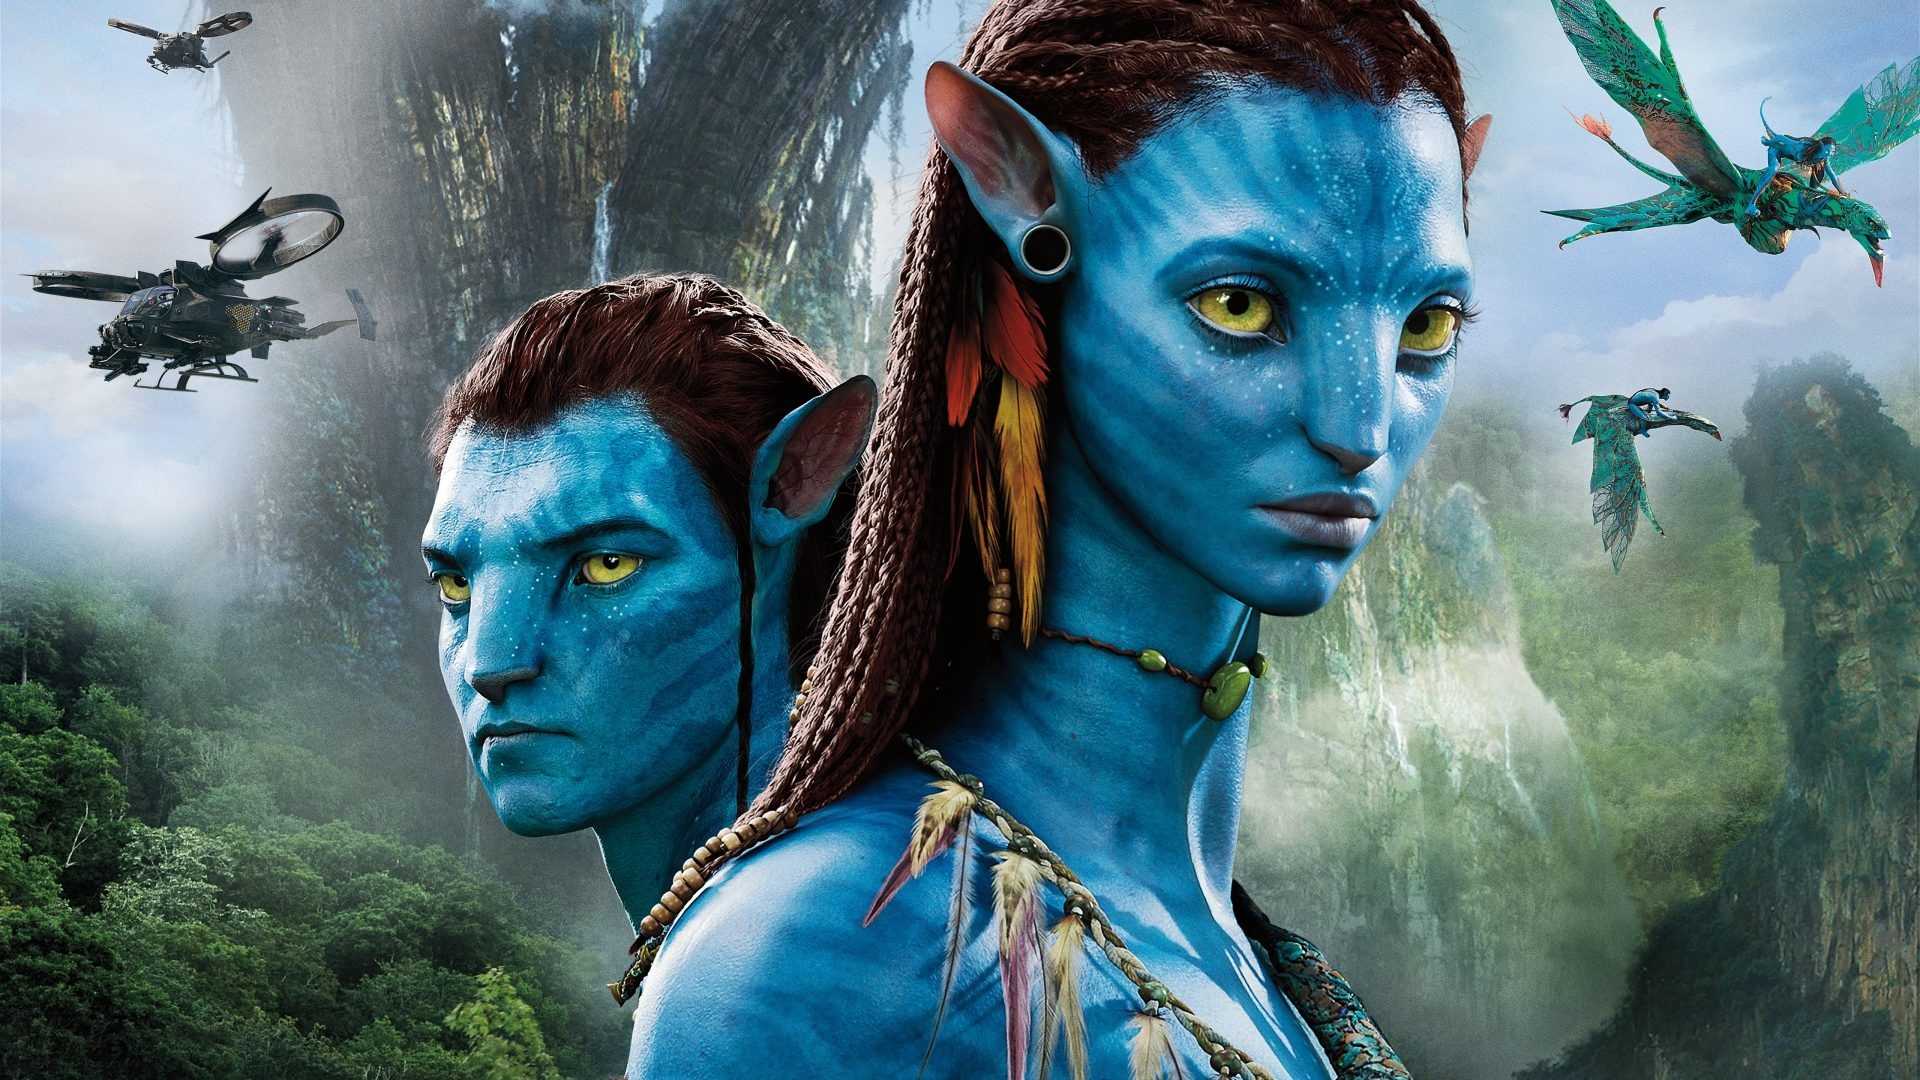 Avatar: The Way of Water's Indian box office collection nears 100 crore on day 2